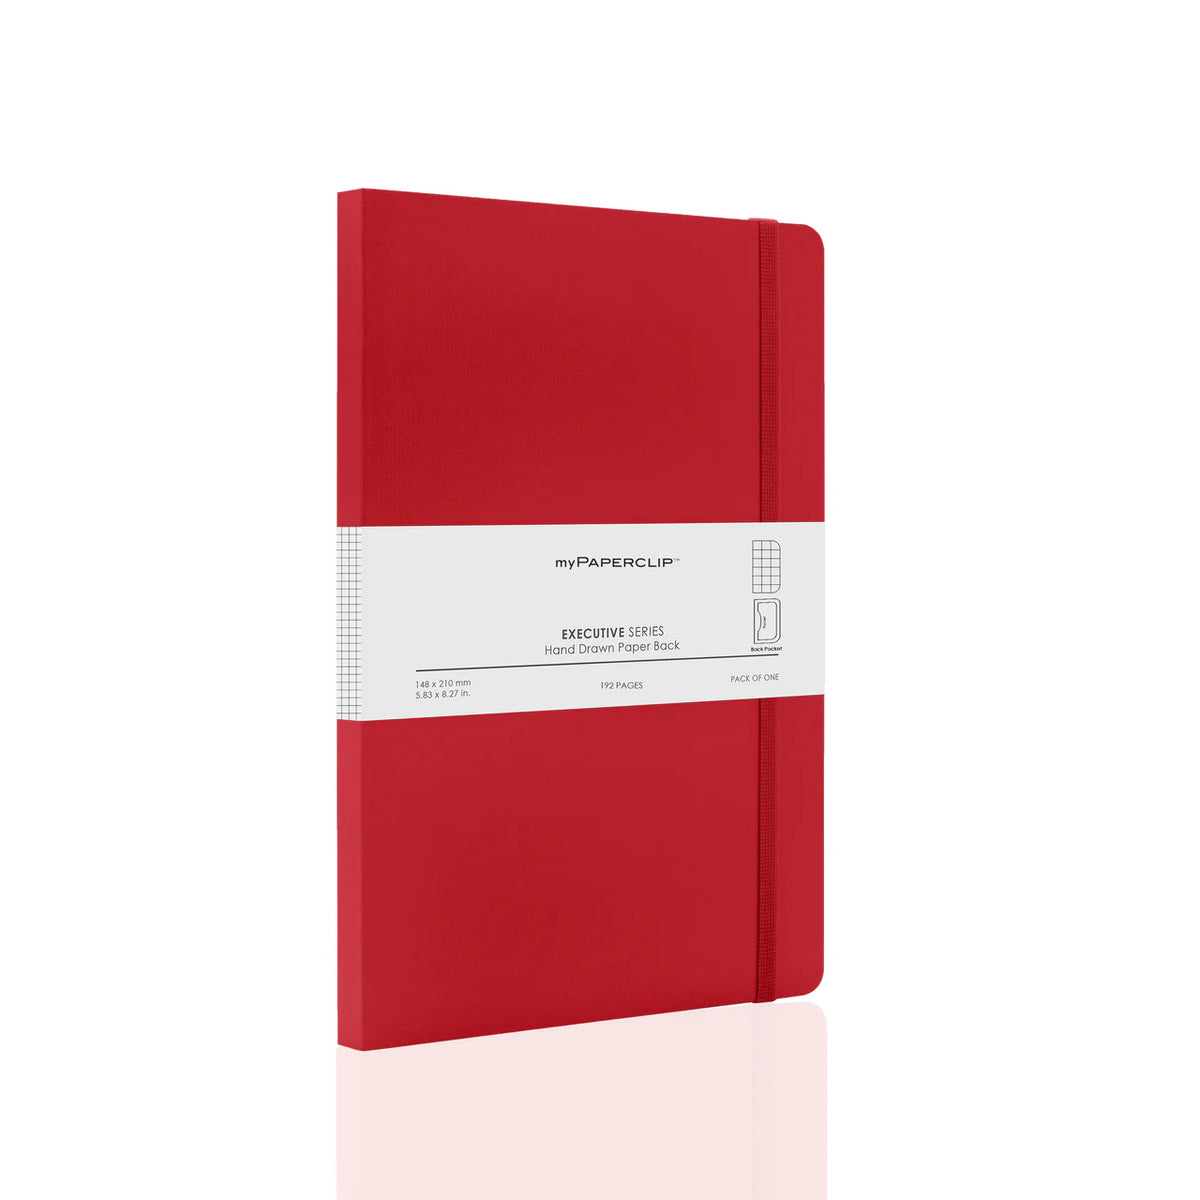 myPAPERCLIP Executive Series A5 Notebook Soft Cover